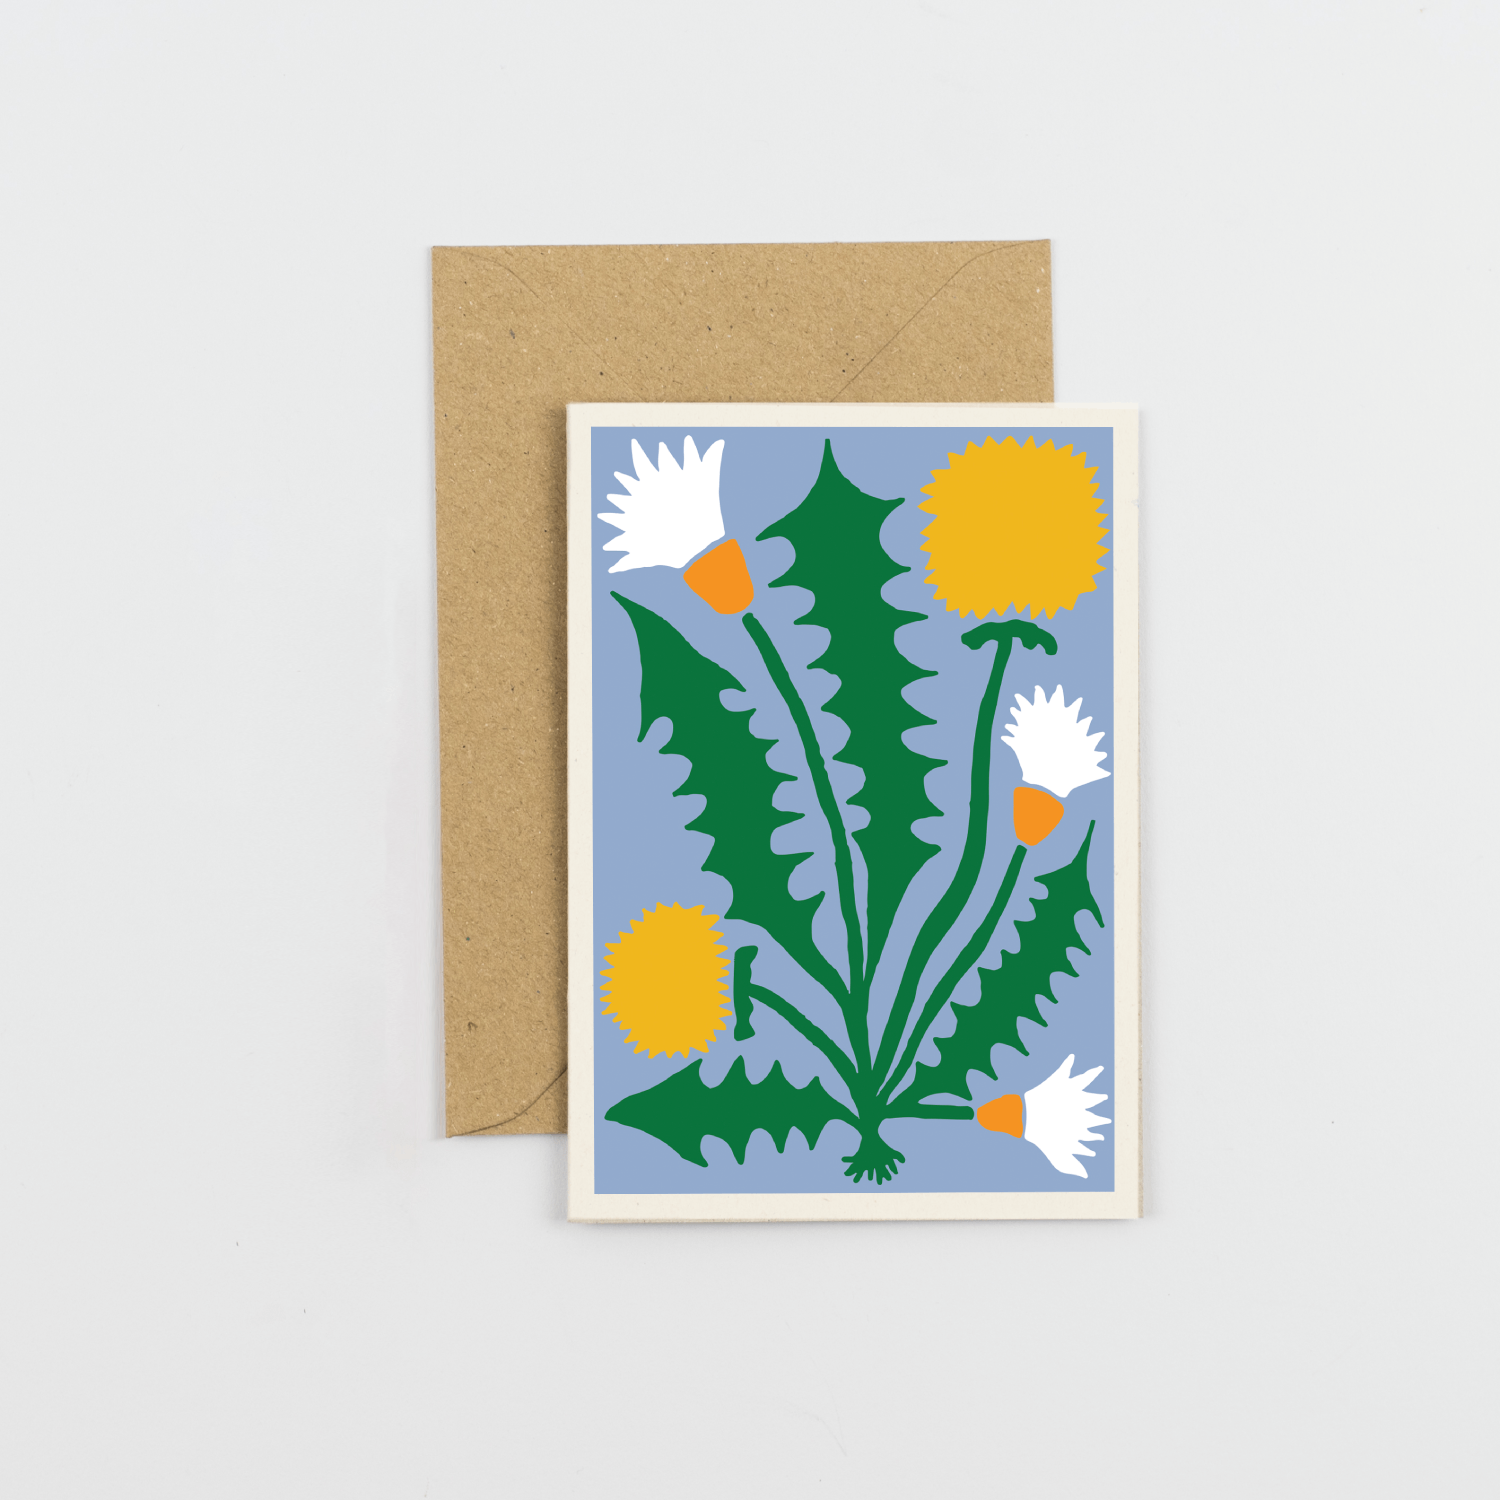 All Occasions Greetings Card - Dandelion